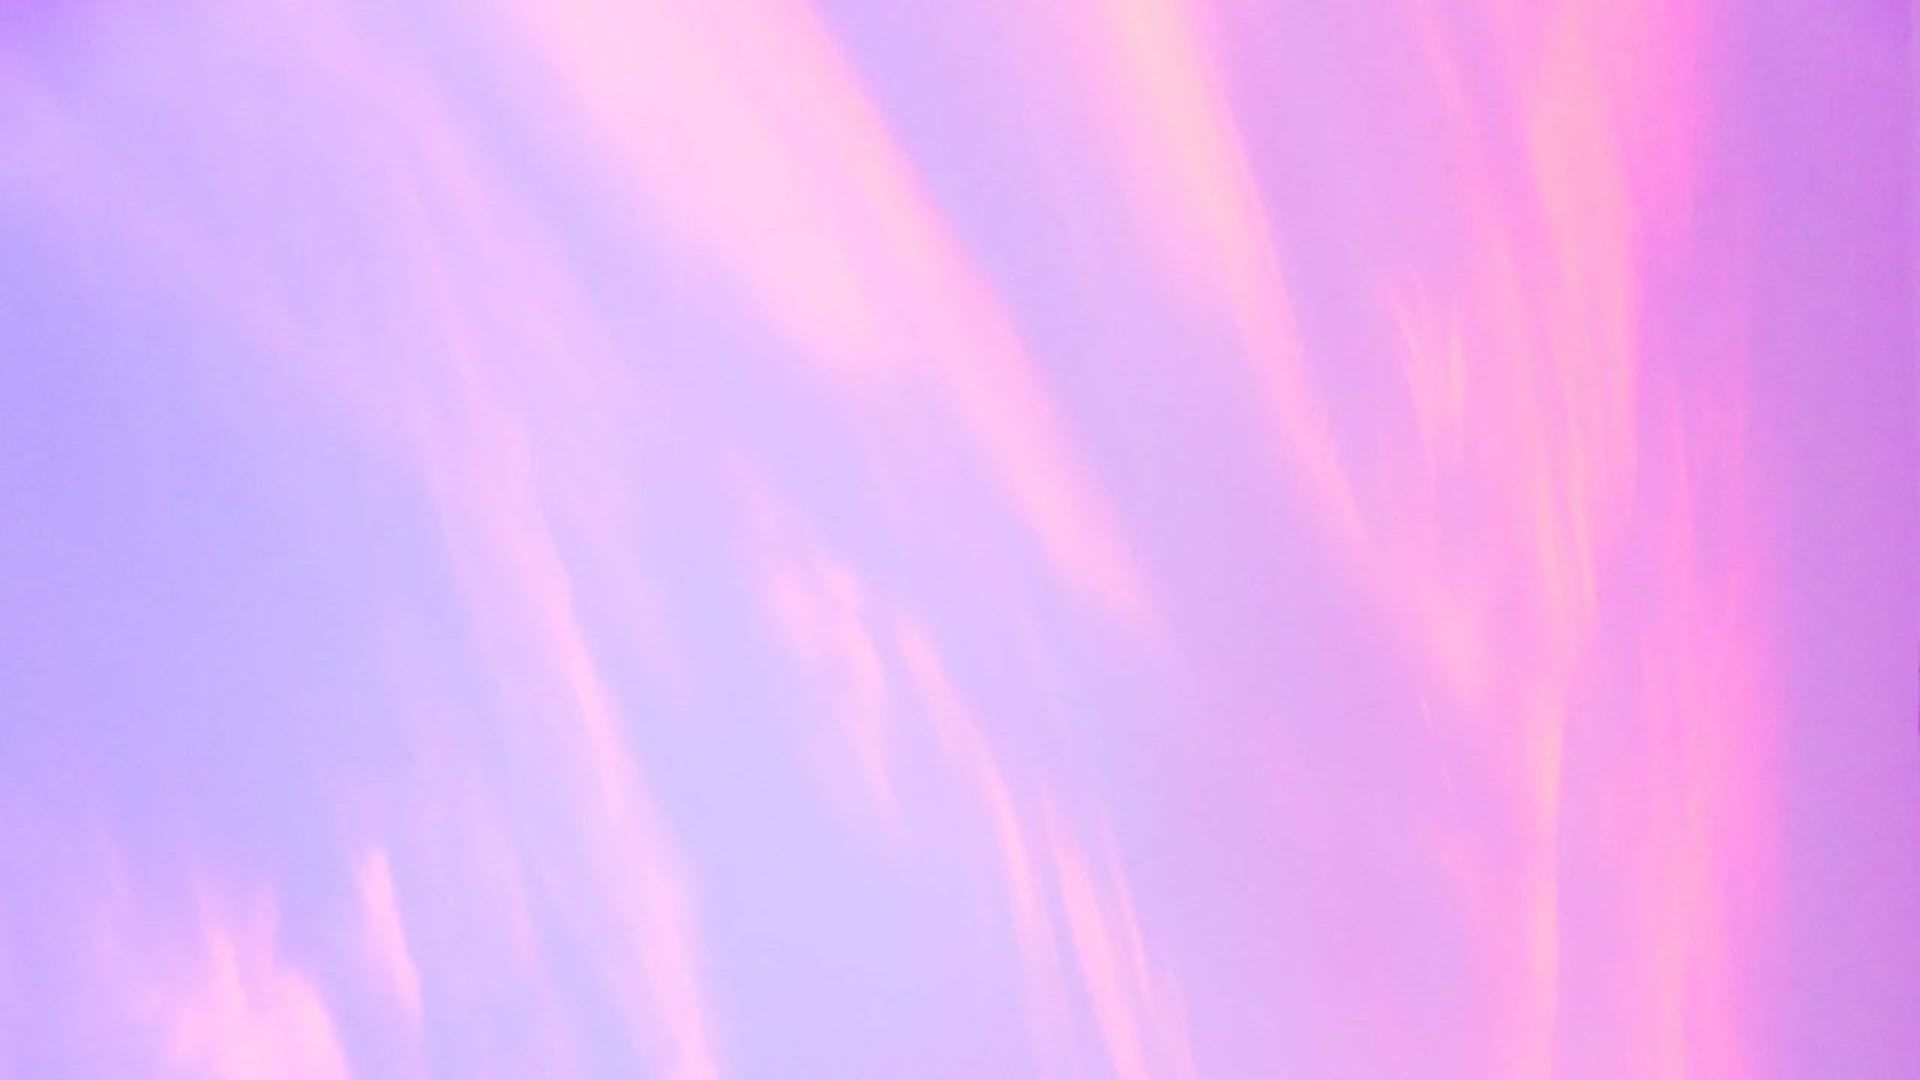 A sky with pink and purple clouds - Computer, desktop, pastel